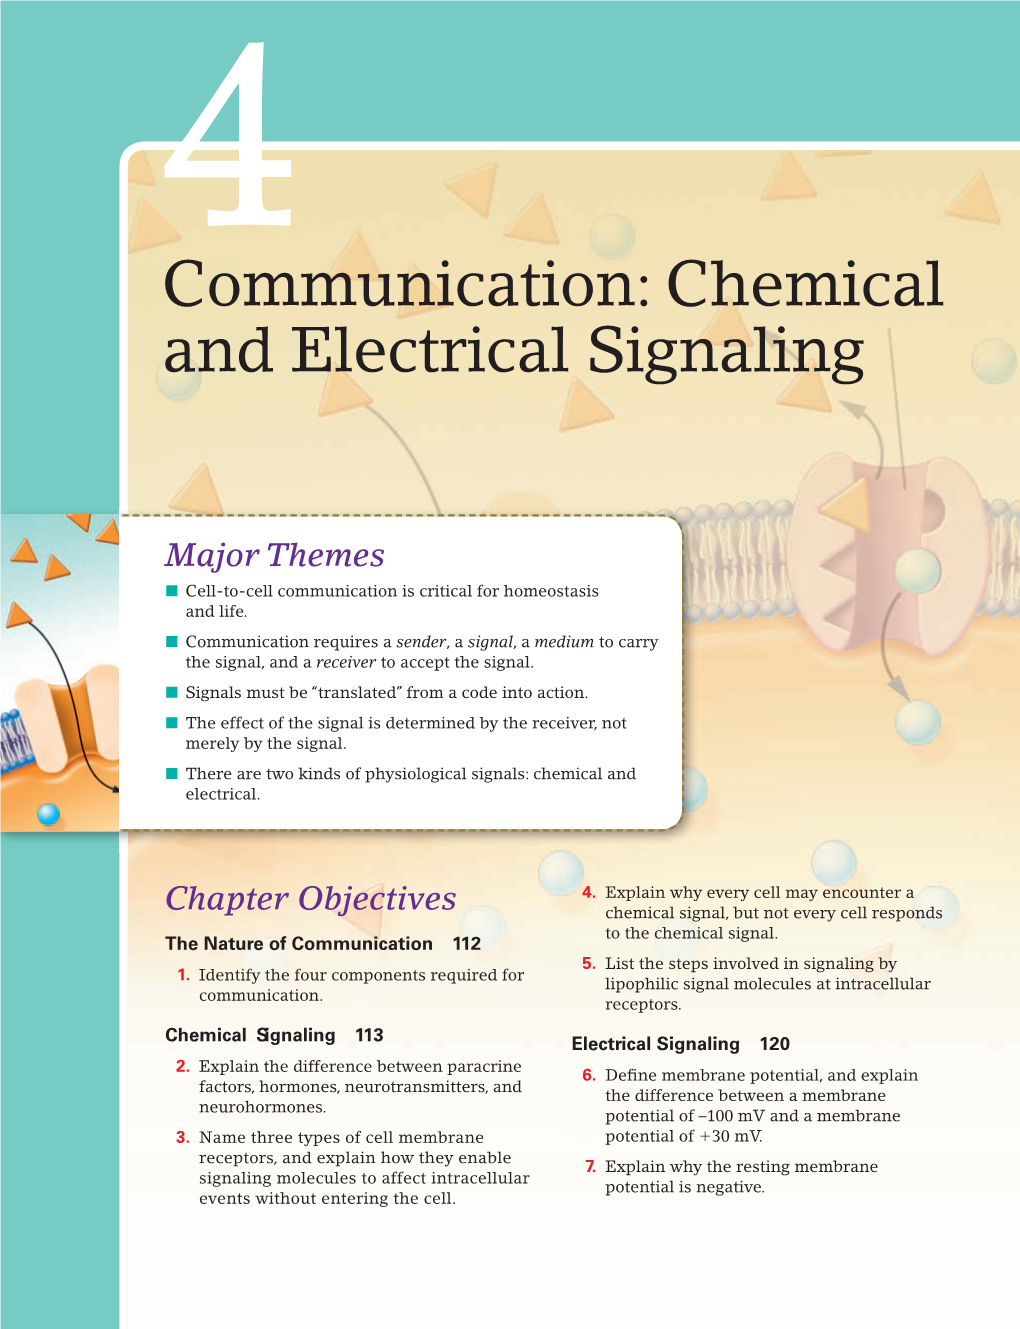 Communication: Chemical and Electrical Signaling